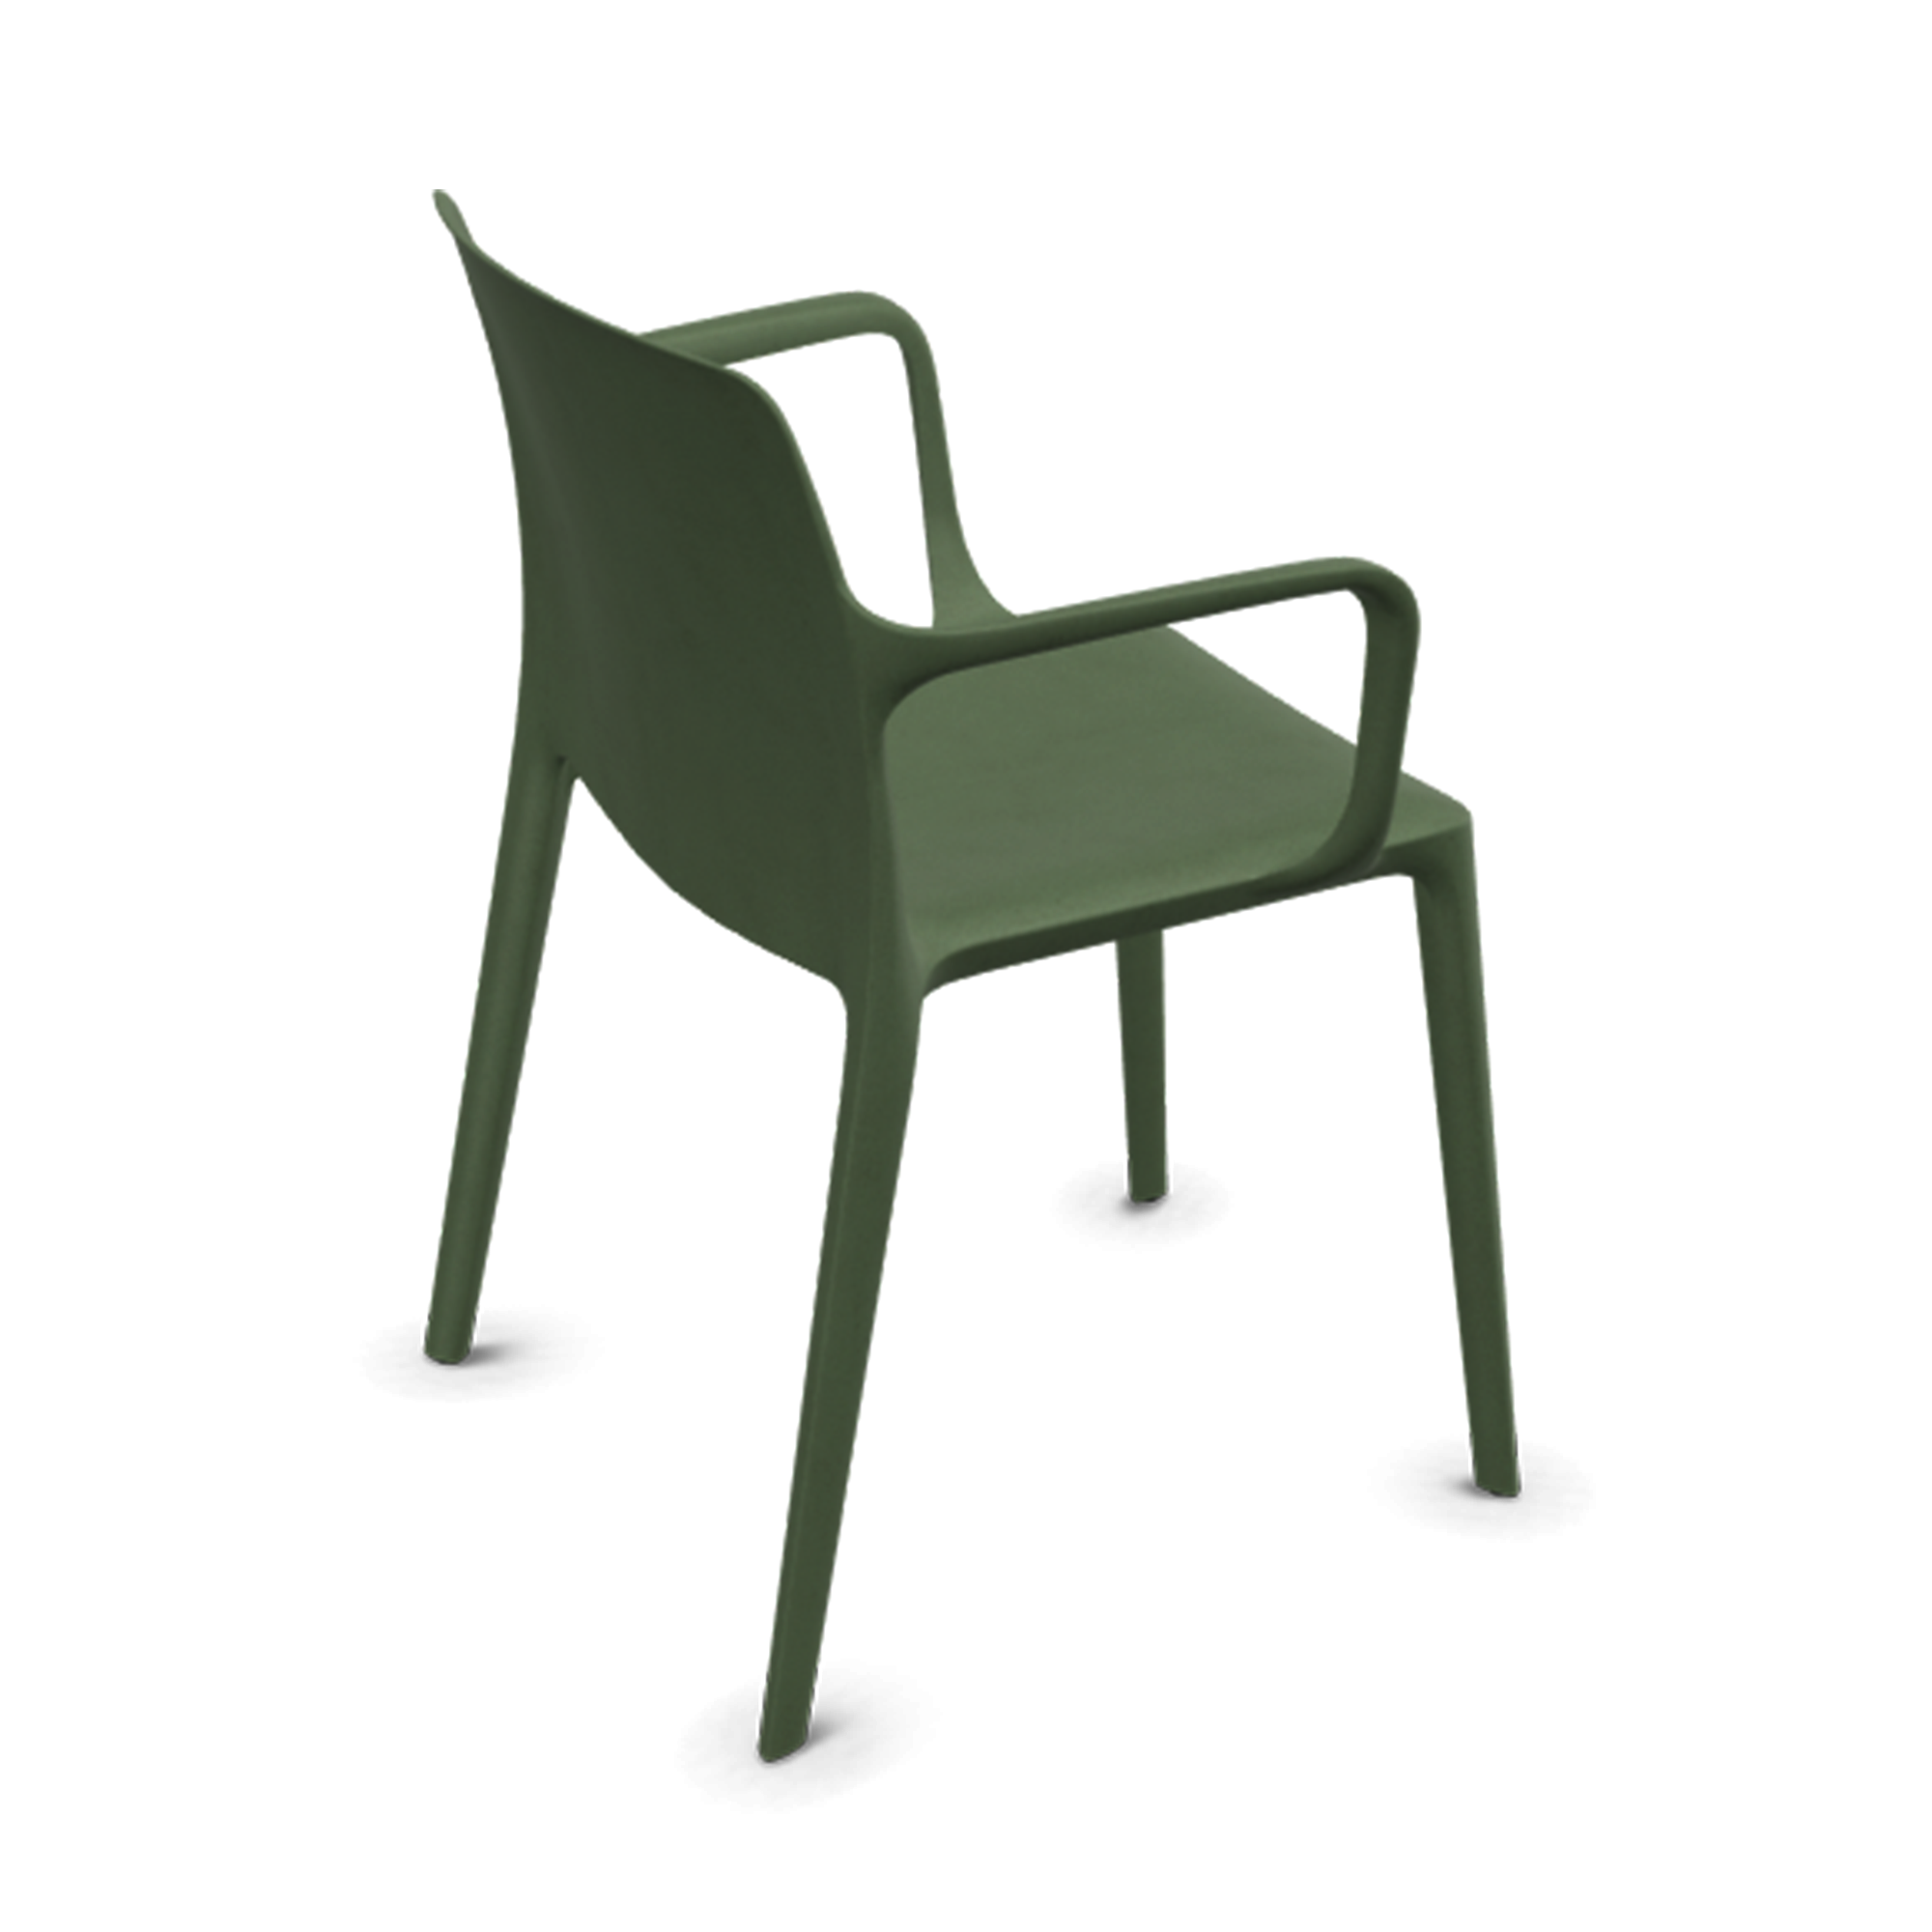 Actiu Fluit Chair with Arms - Green | Buy Your Home Appliances Online ...